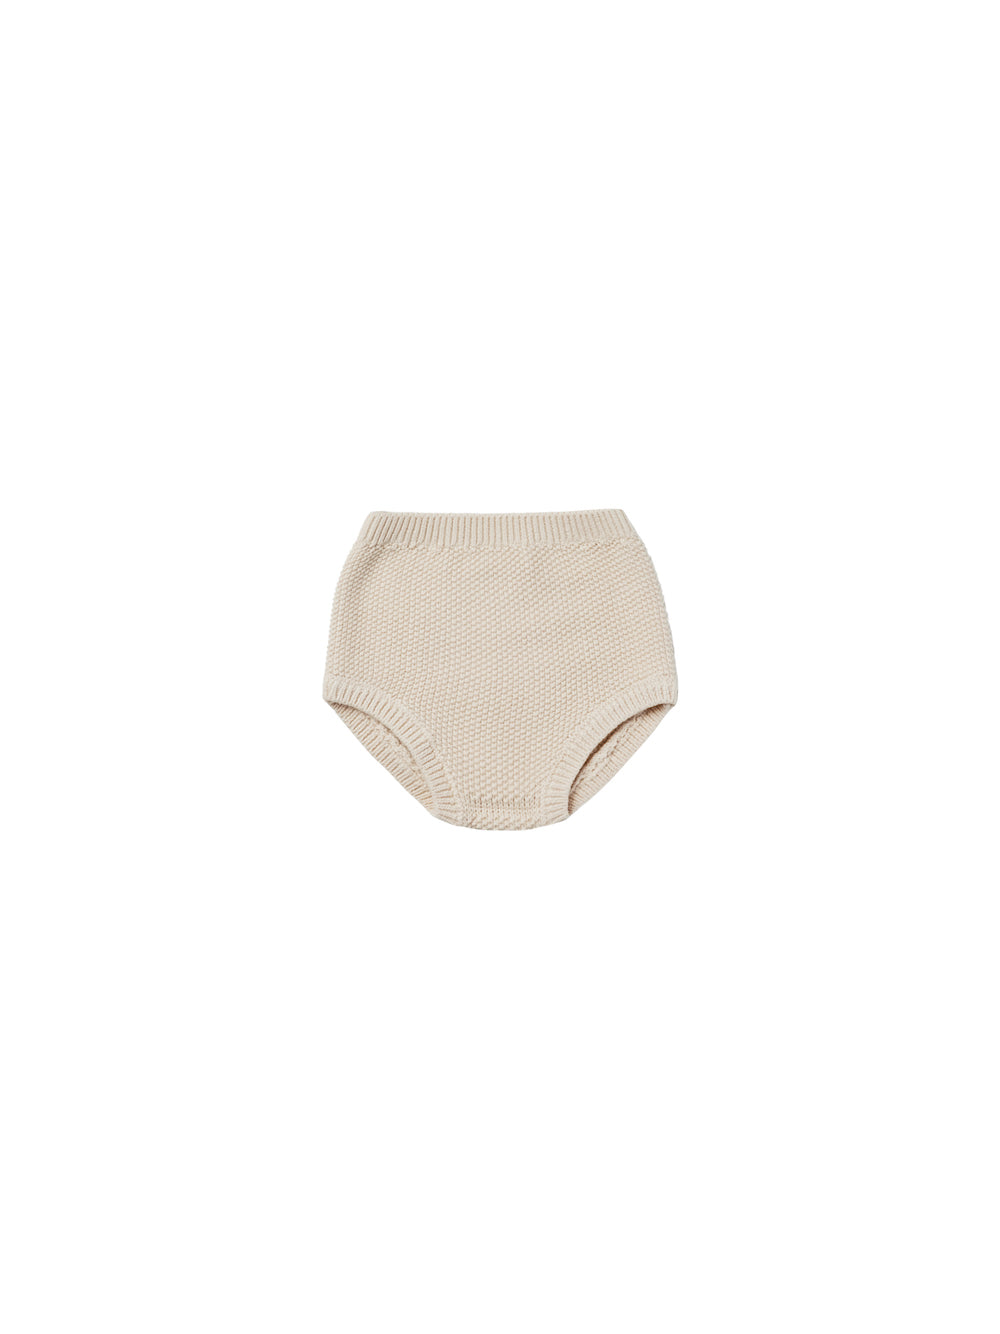 Quincy Mae Knit Bloomer - Natural